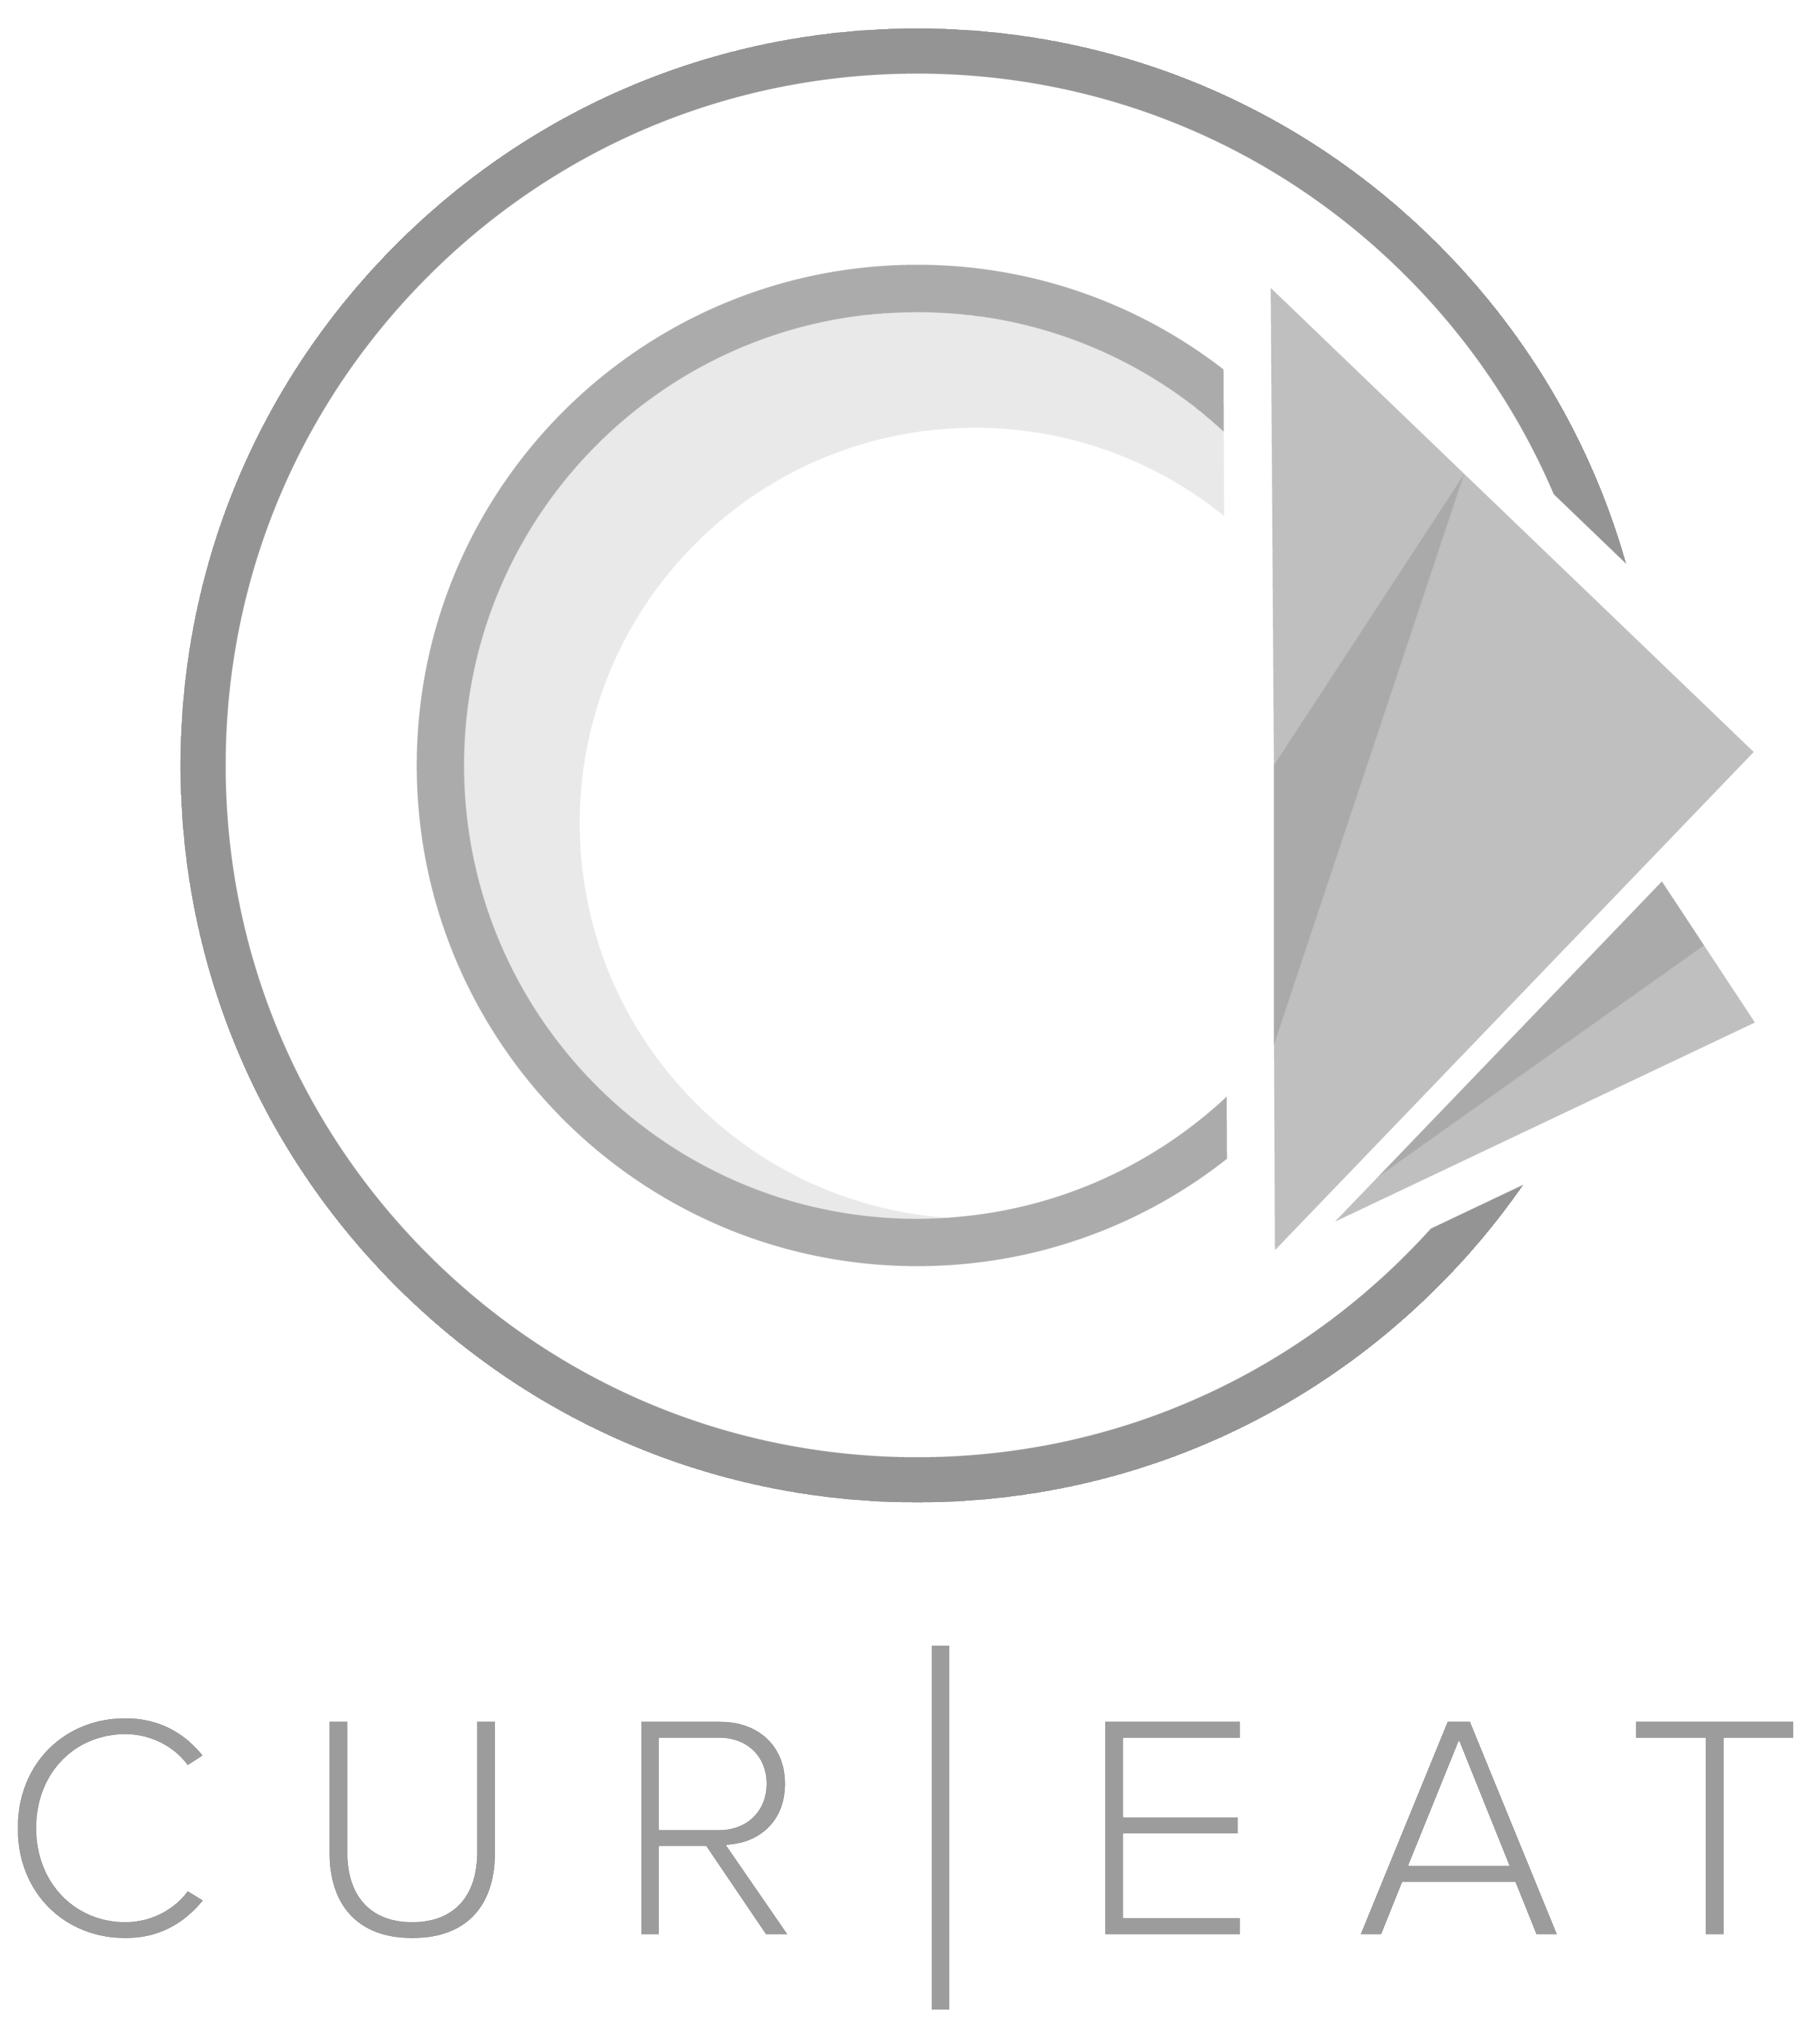 CurEat-gray.png